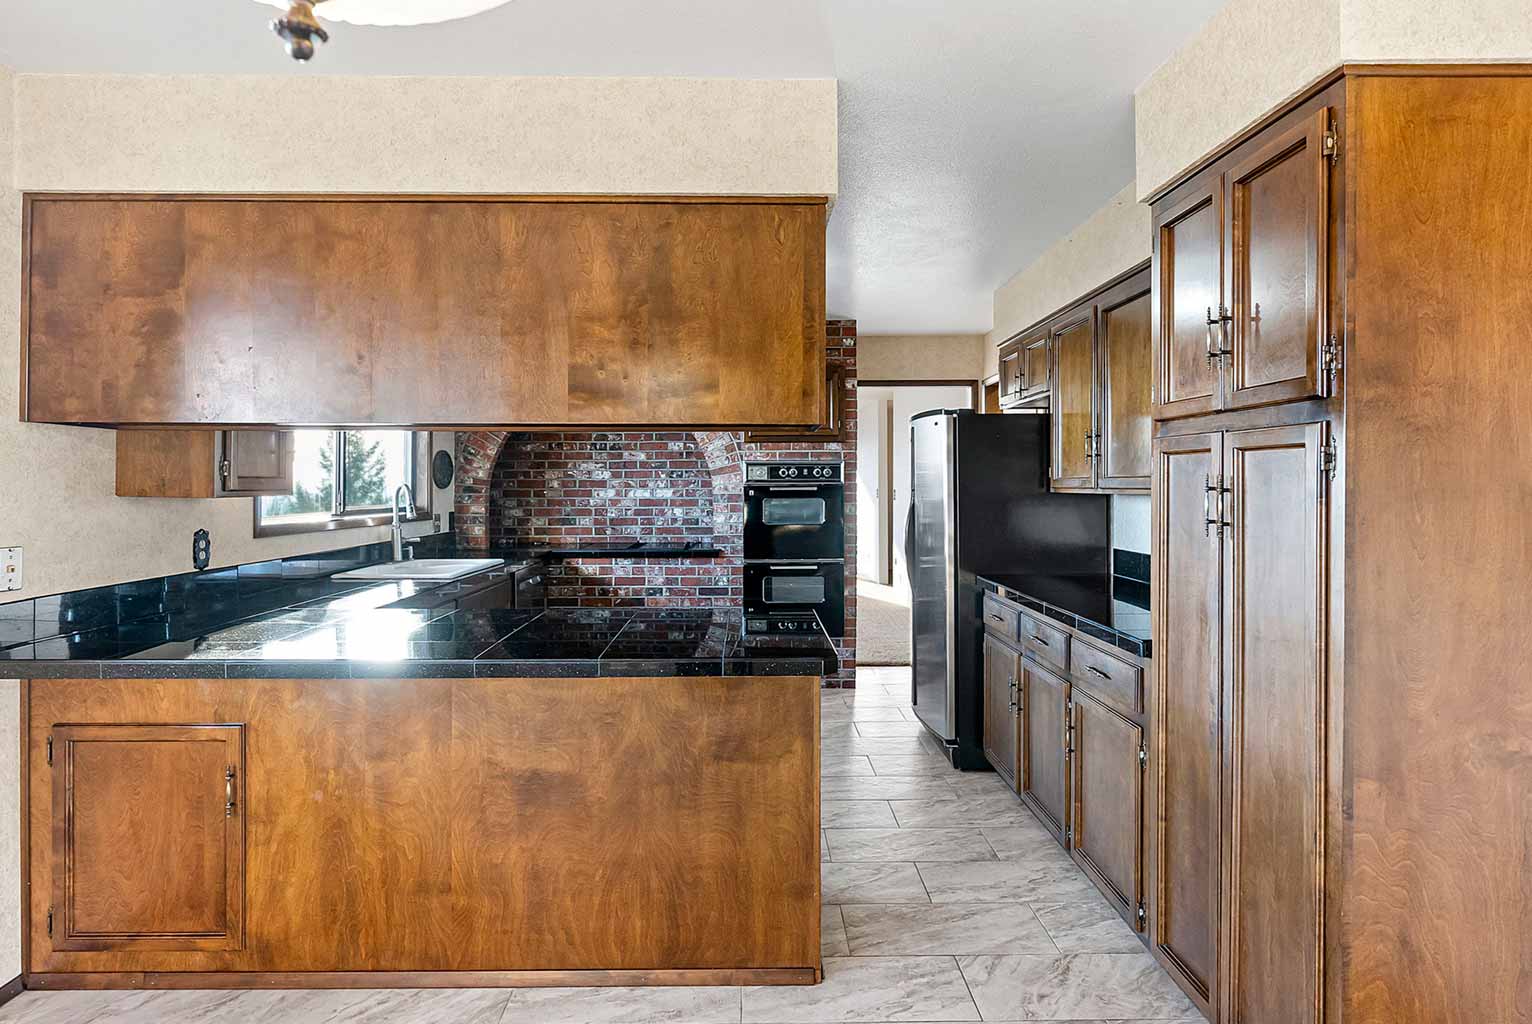 Kitchen offers ample storage space